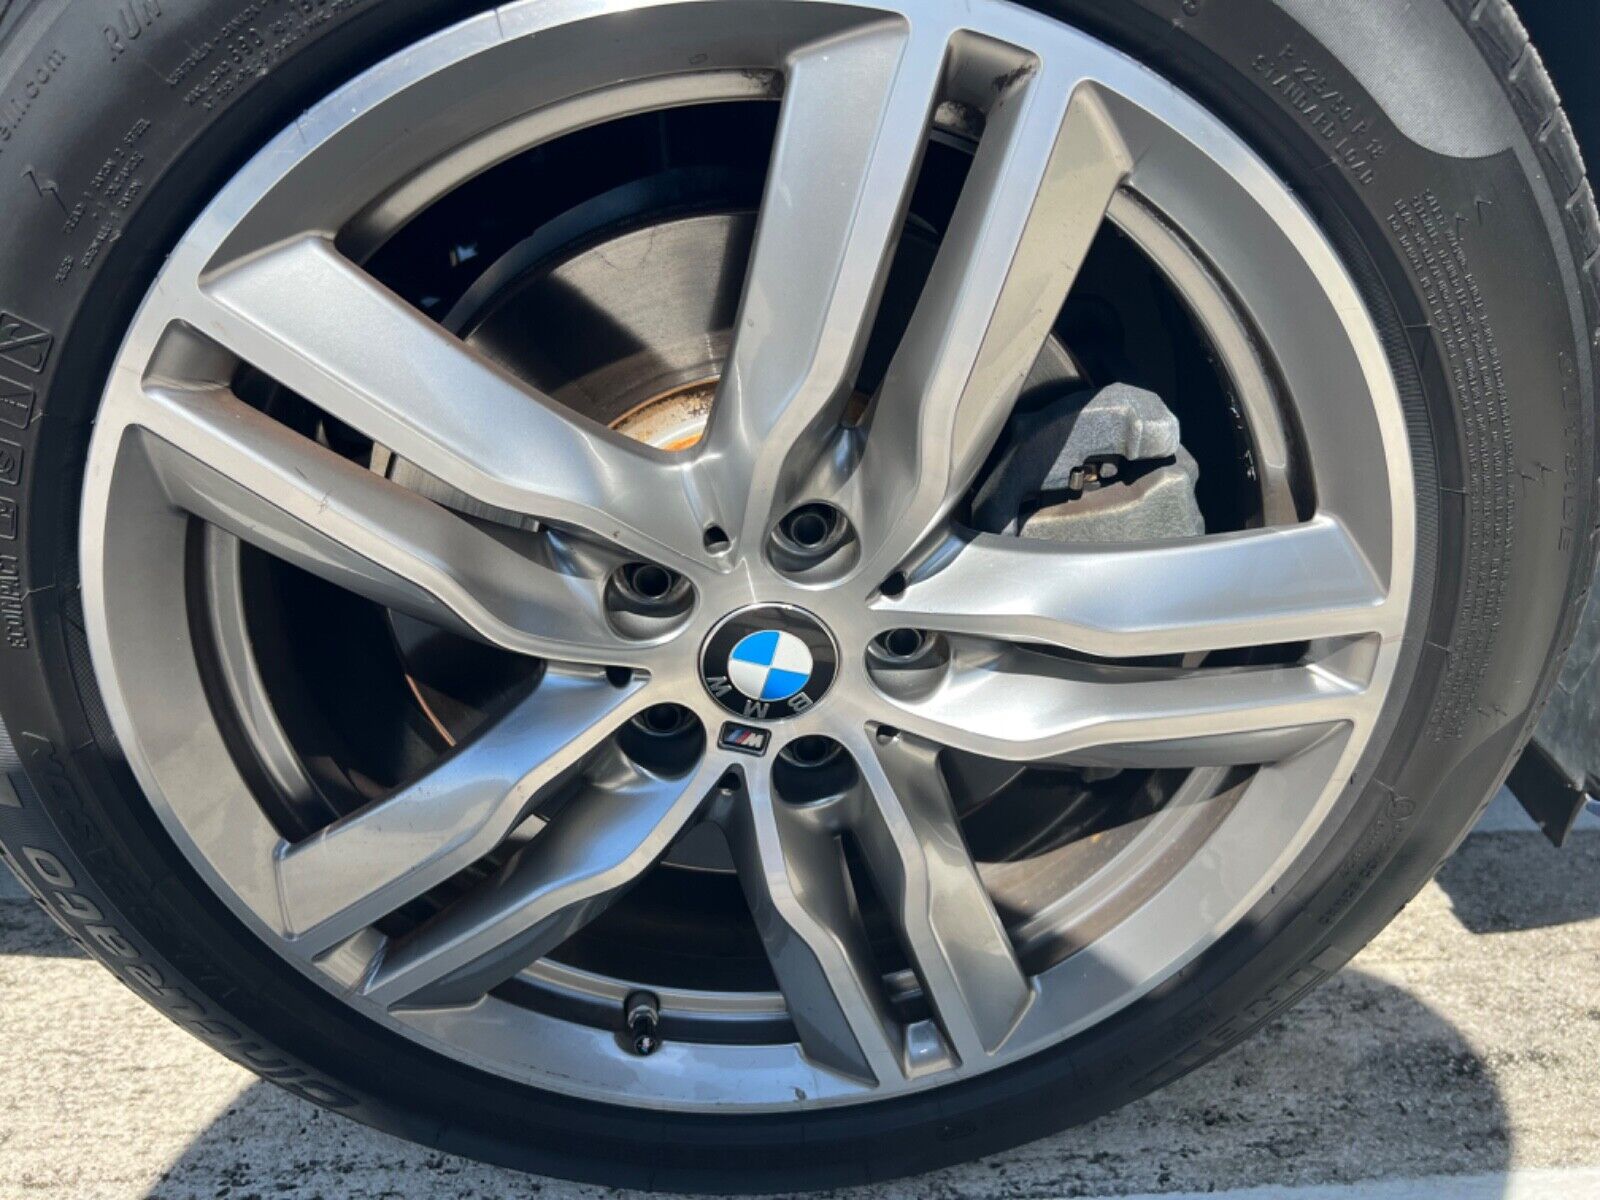 4 BMW M18 inch OEM Factory RIMS ONLY. Great condition set of 4. Must buy all 4 